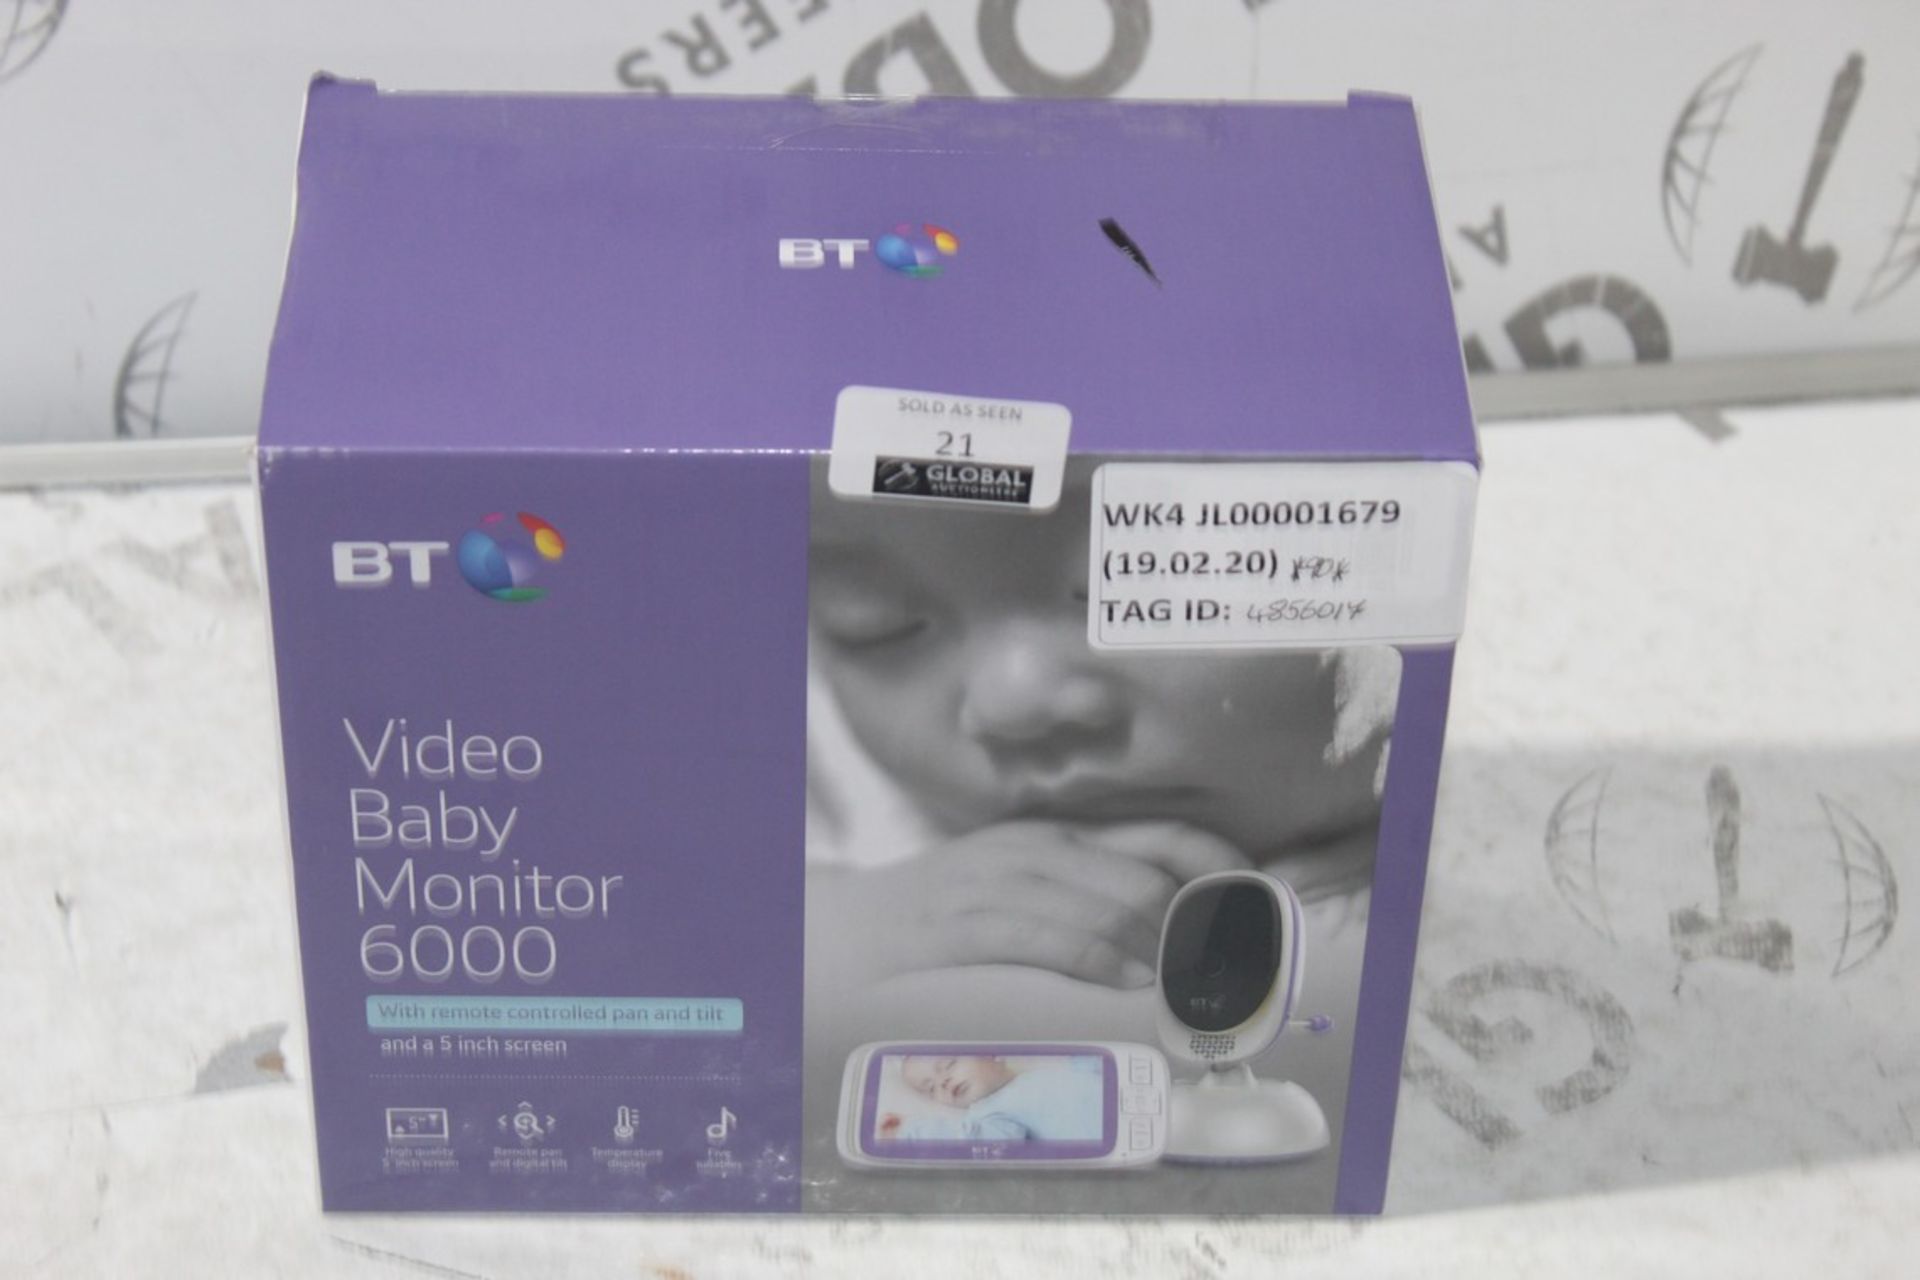 Boxed BT Video Baby Monitor 6000 5in Digital Video